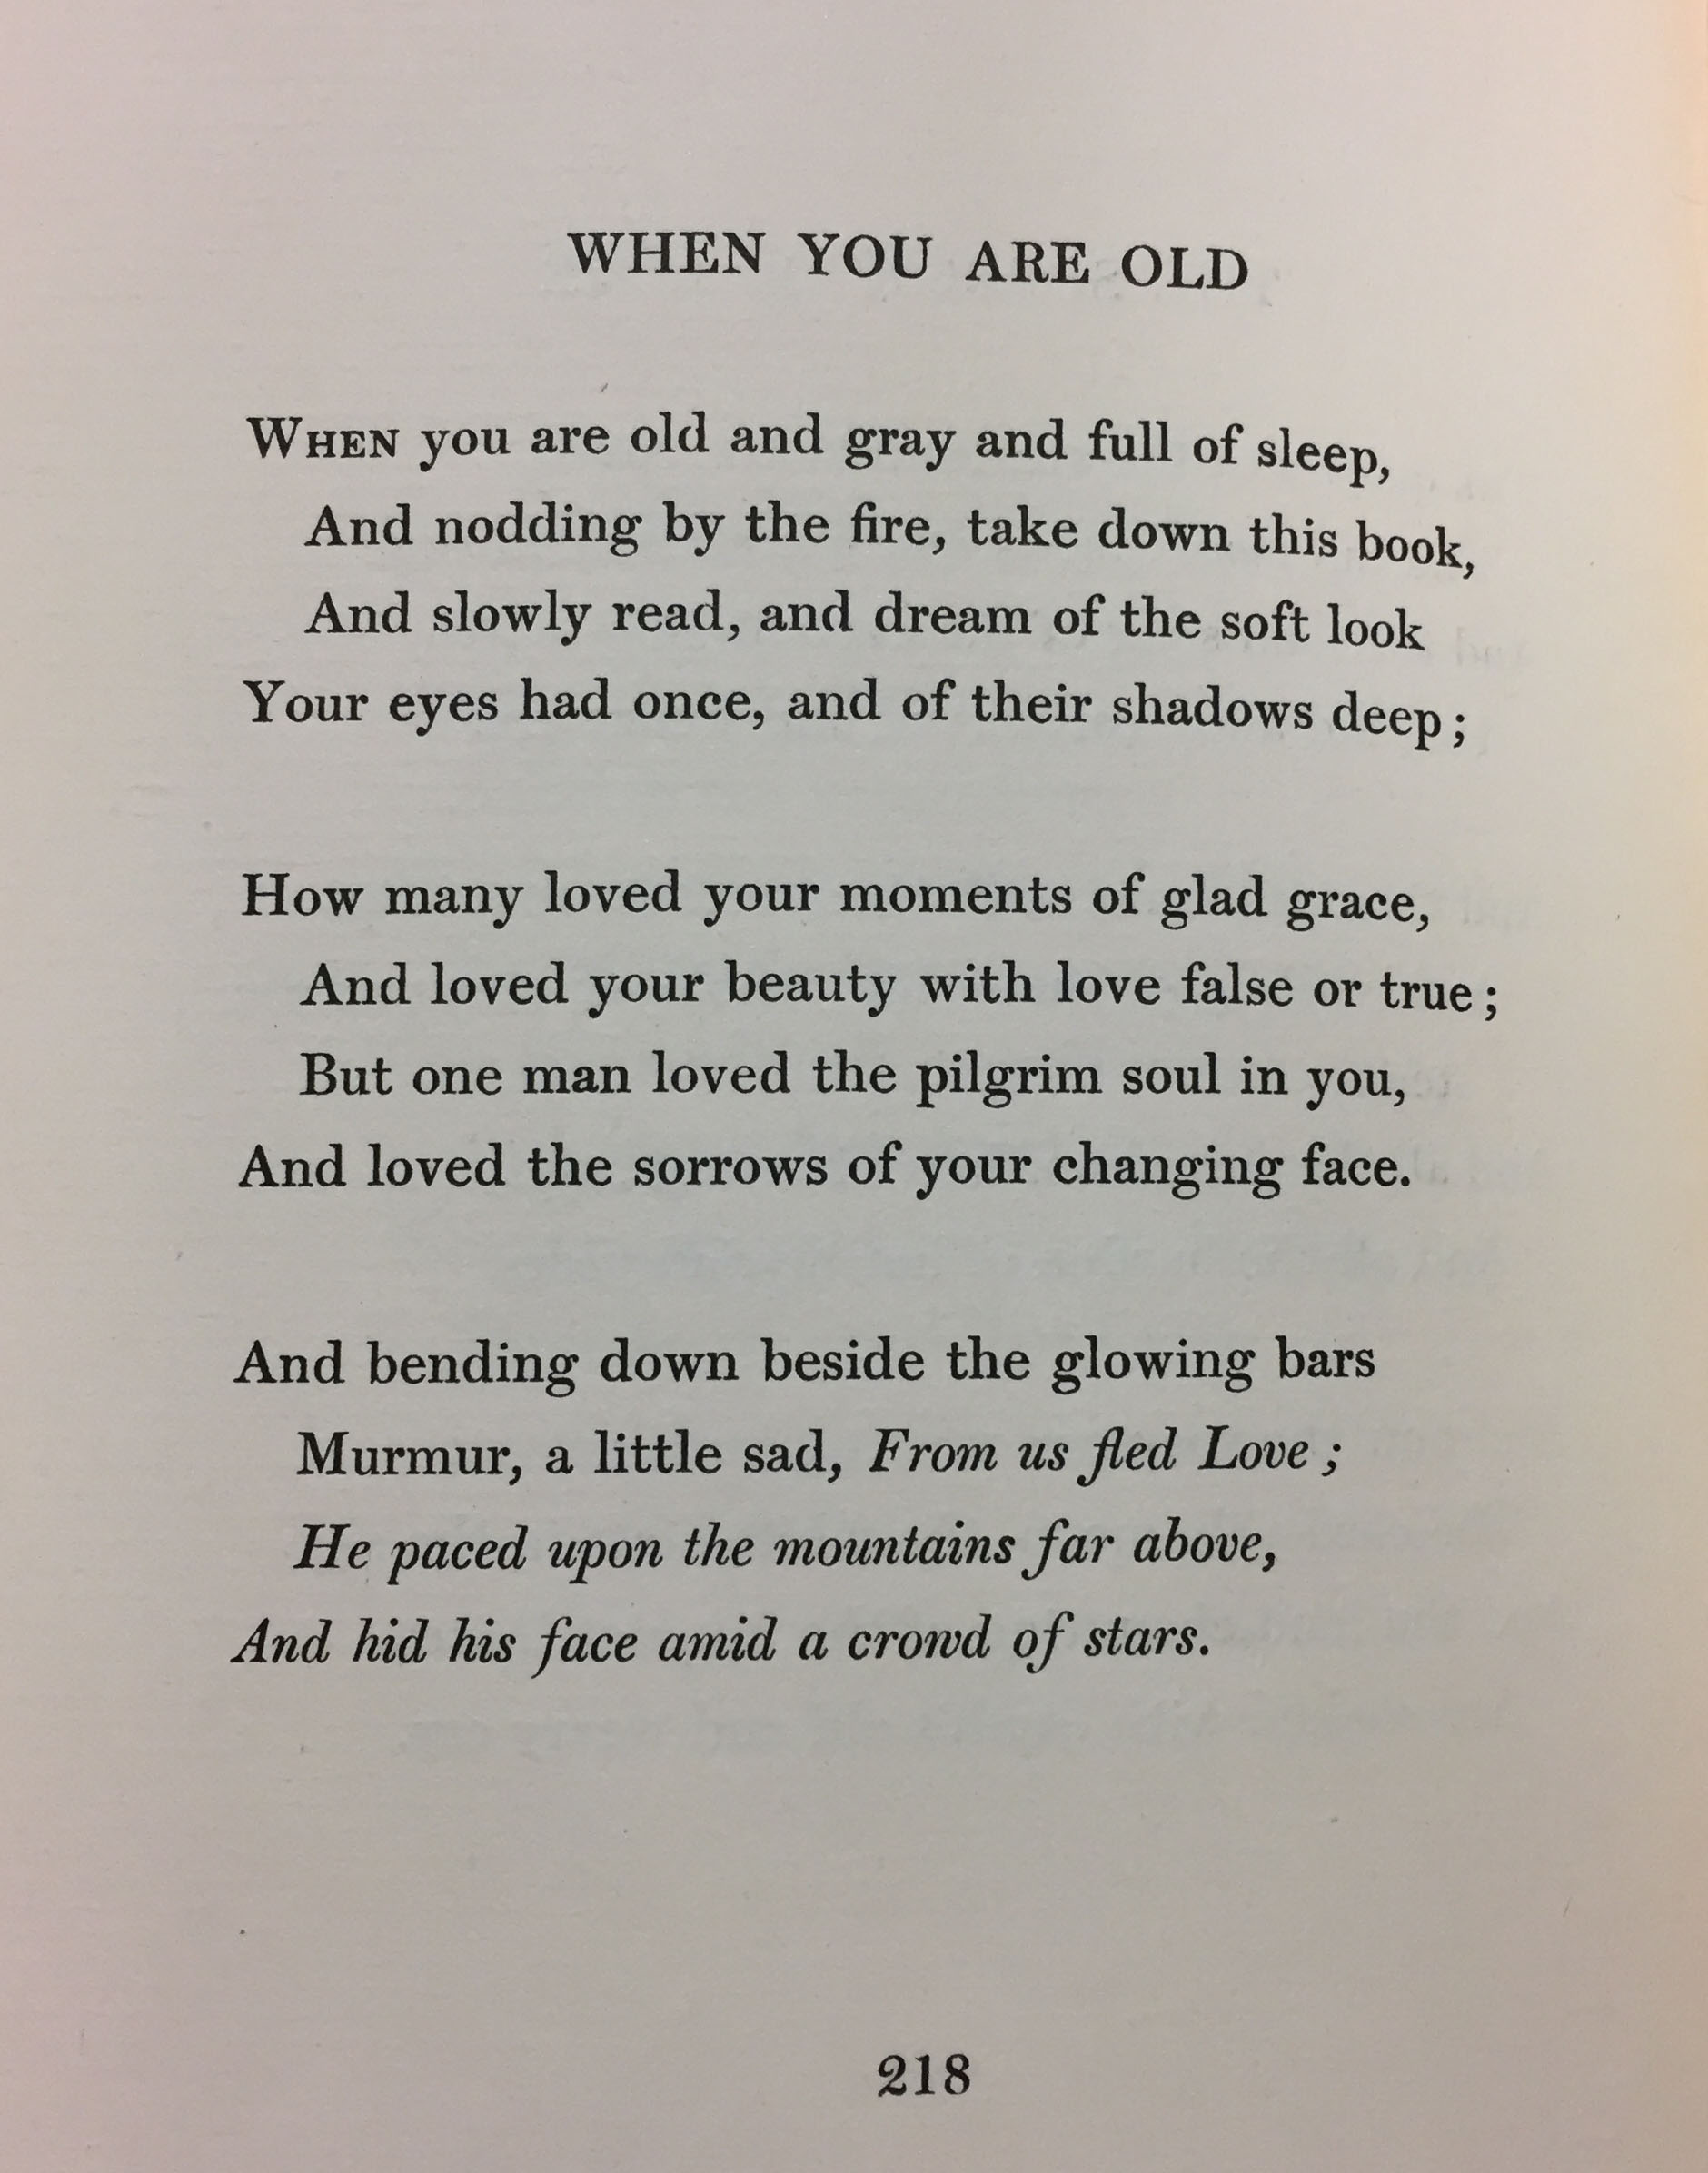 Original version of the poem, "When You Are Old," as it appears in W. B. Yeats, Poems (London: T. Fisher Unwin, 1895) (PR5900 .A3 1895)